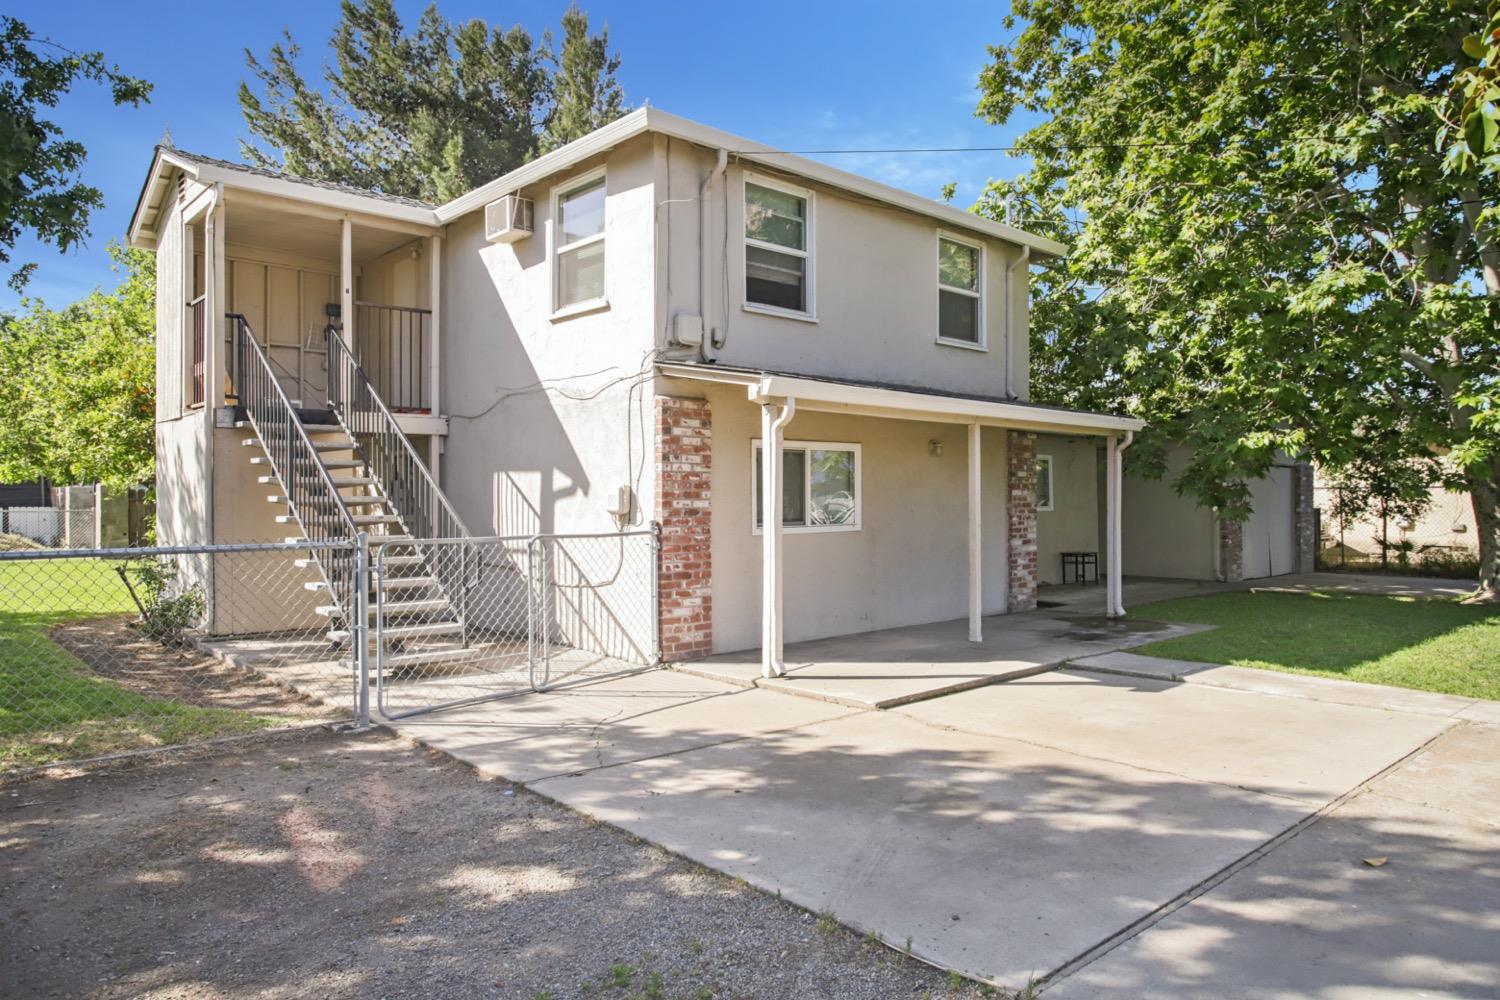 2150 Michael Ave - Stockton -  presented by James Tan MBA Broker/Realtor - Bethany Real Estate and Investments - One of the best real estate agent in Elk Grove